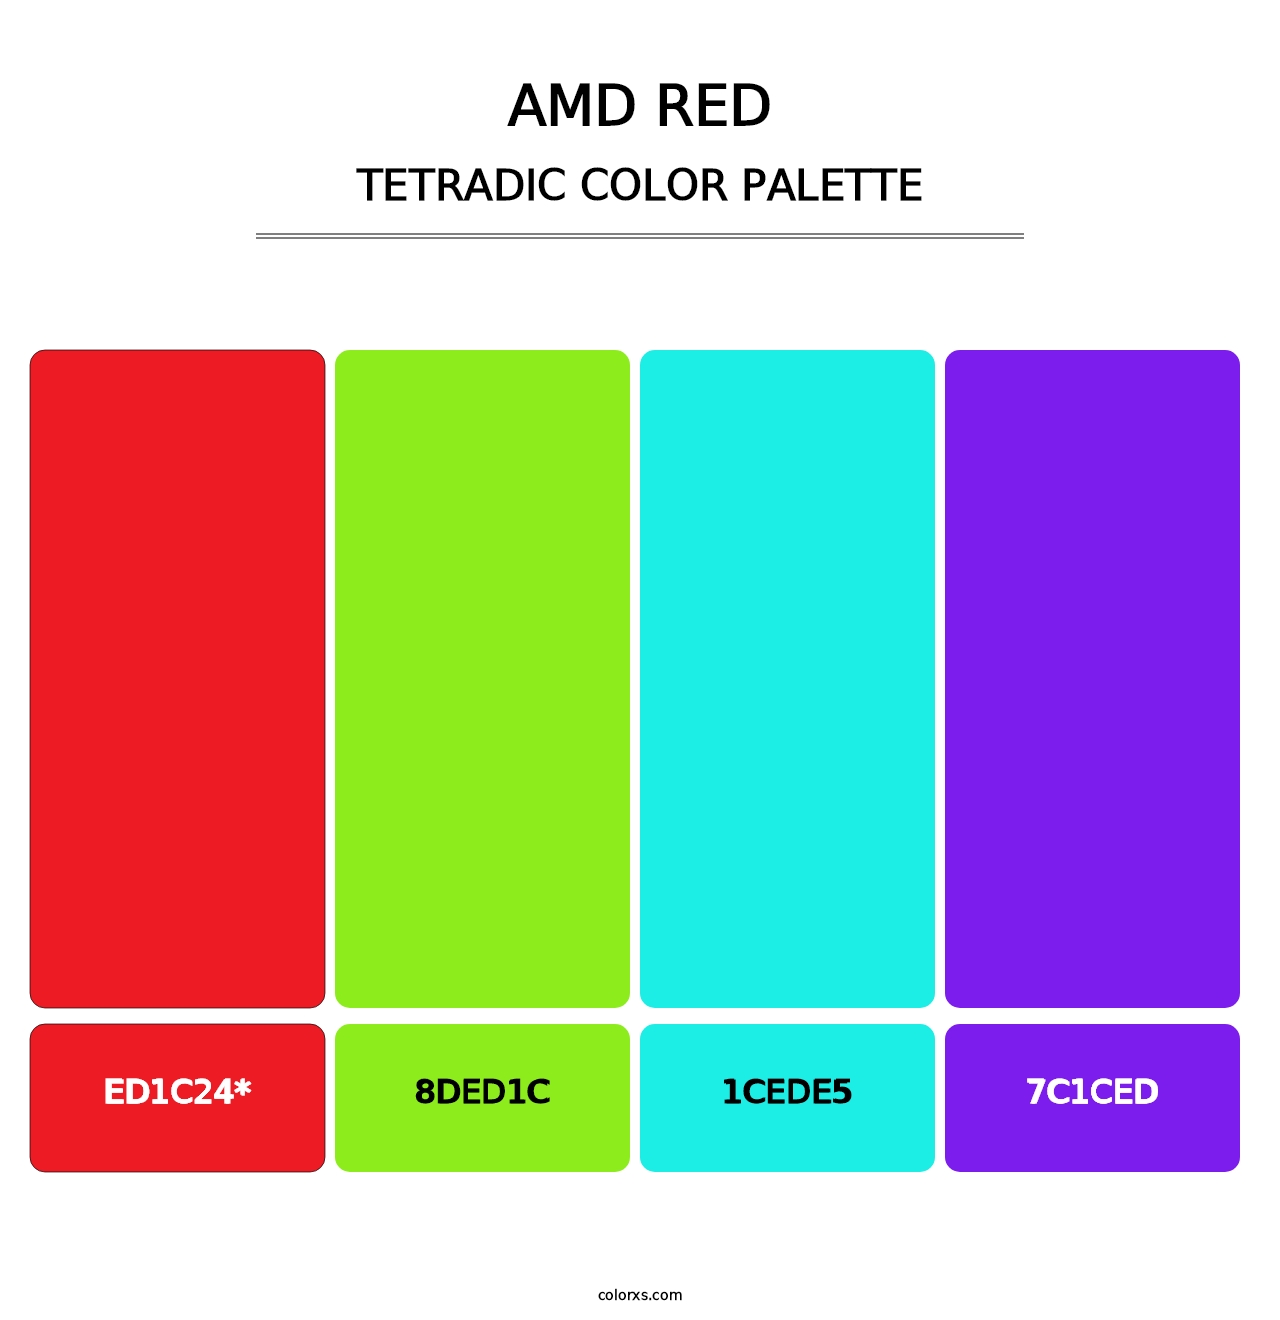 AMD Red - Tetradic Color Palette